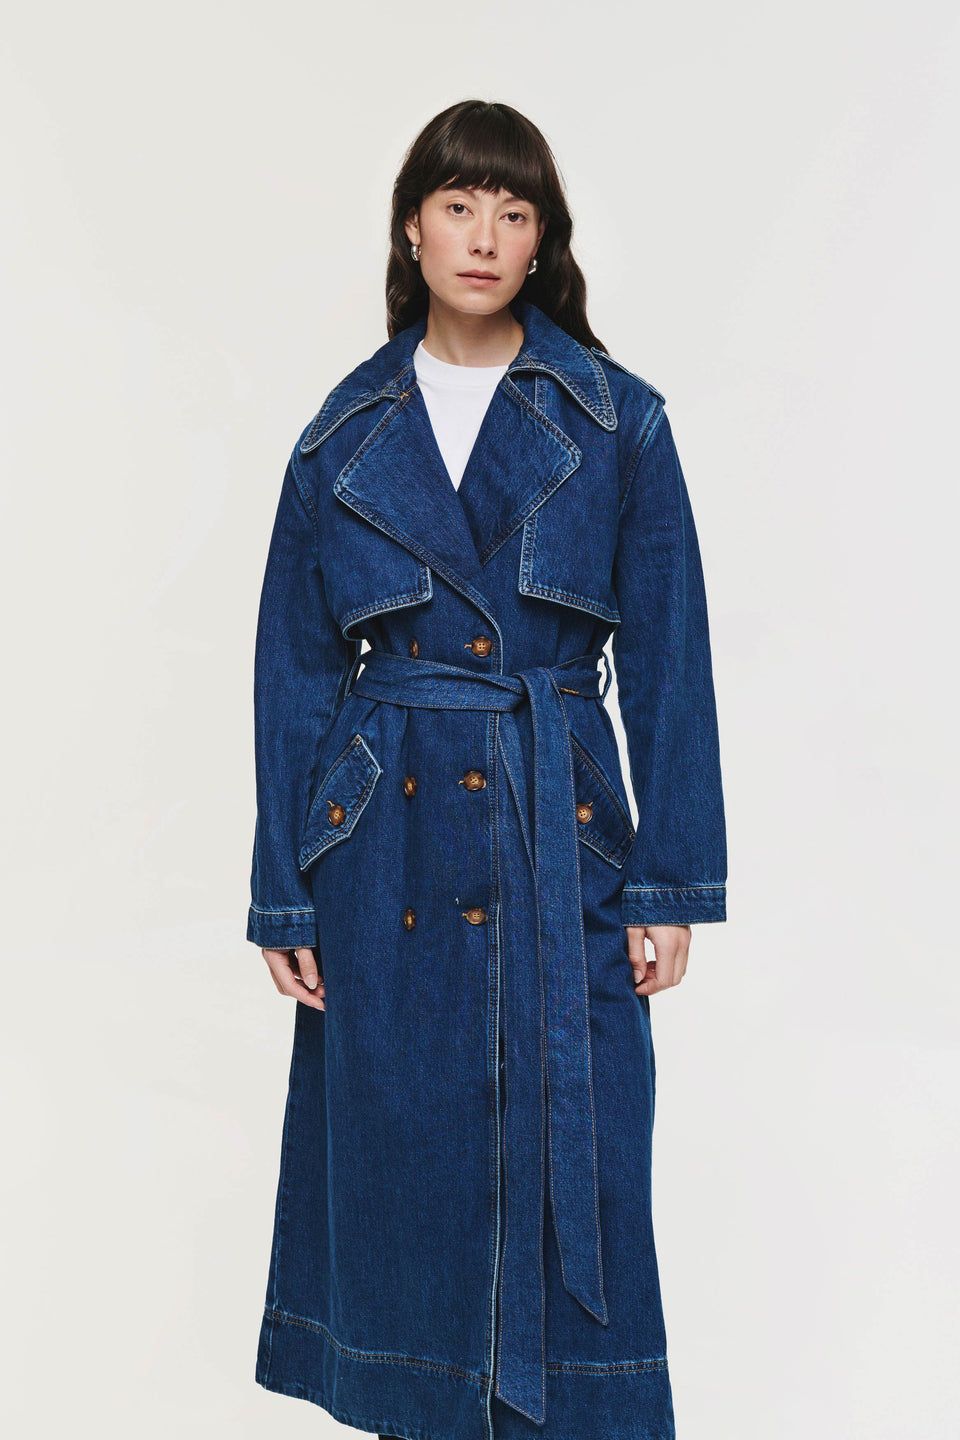 Best new spring coats - spring fashion